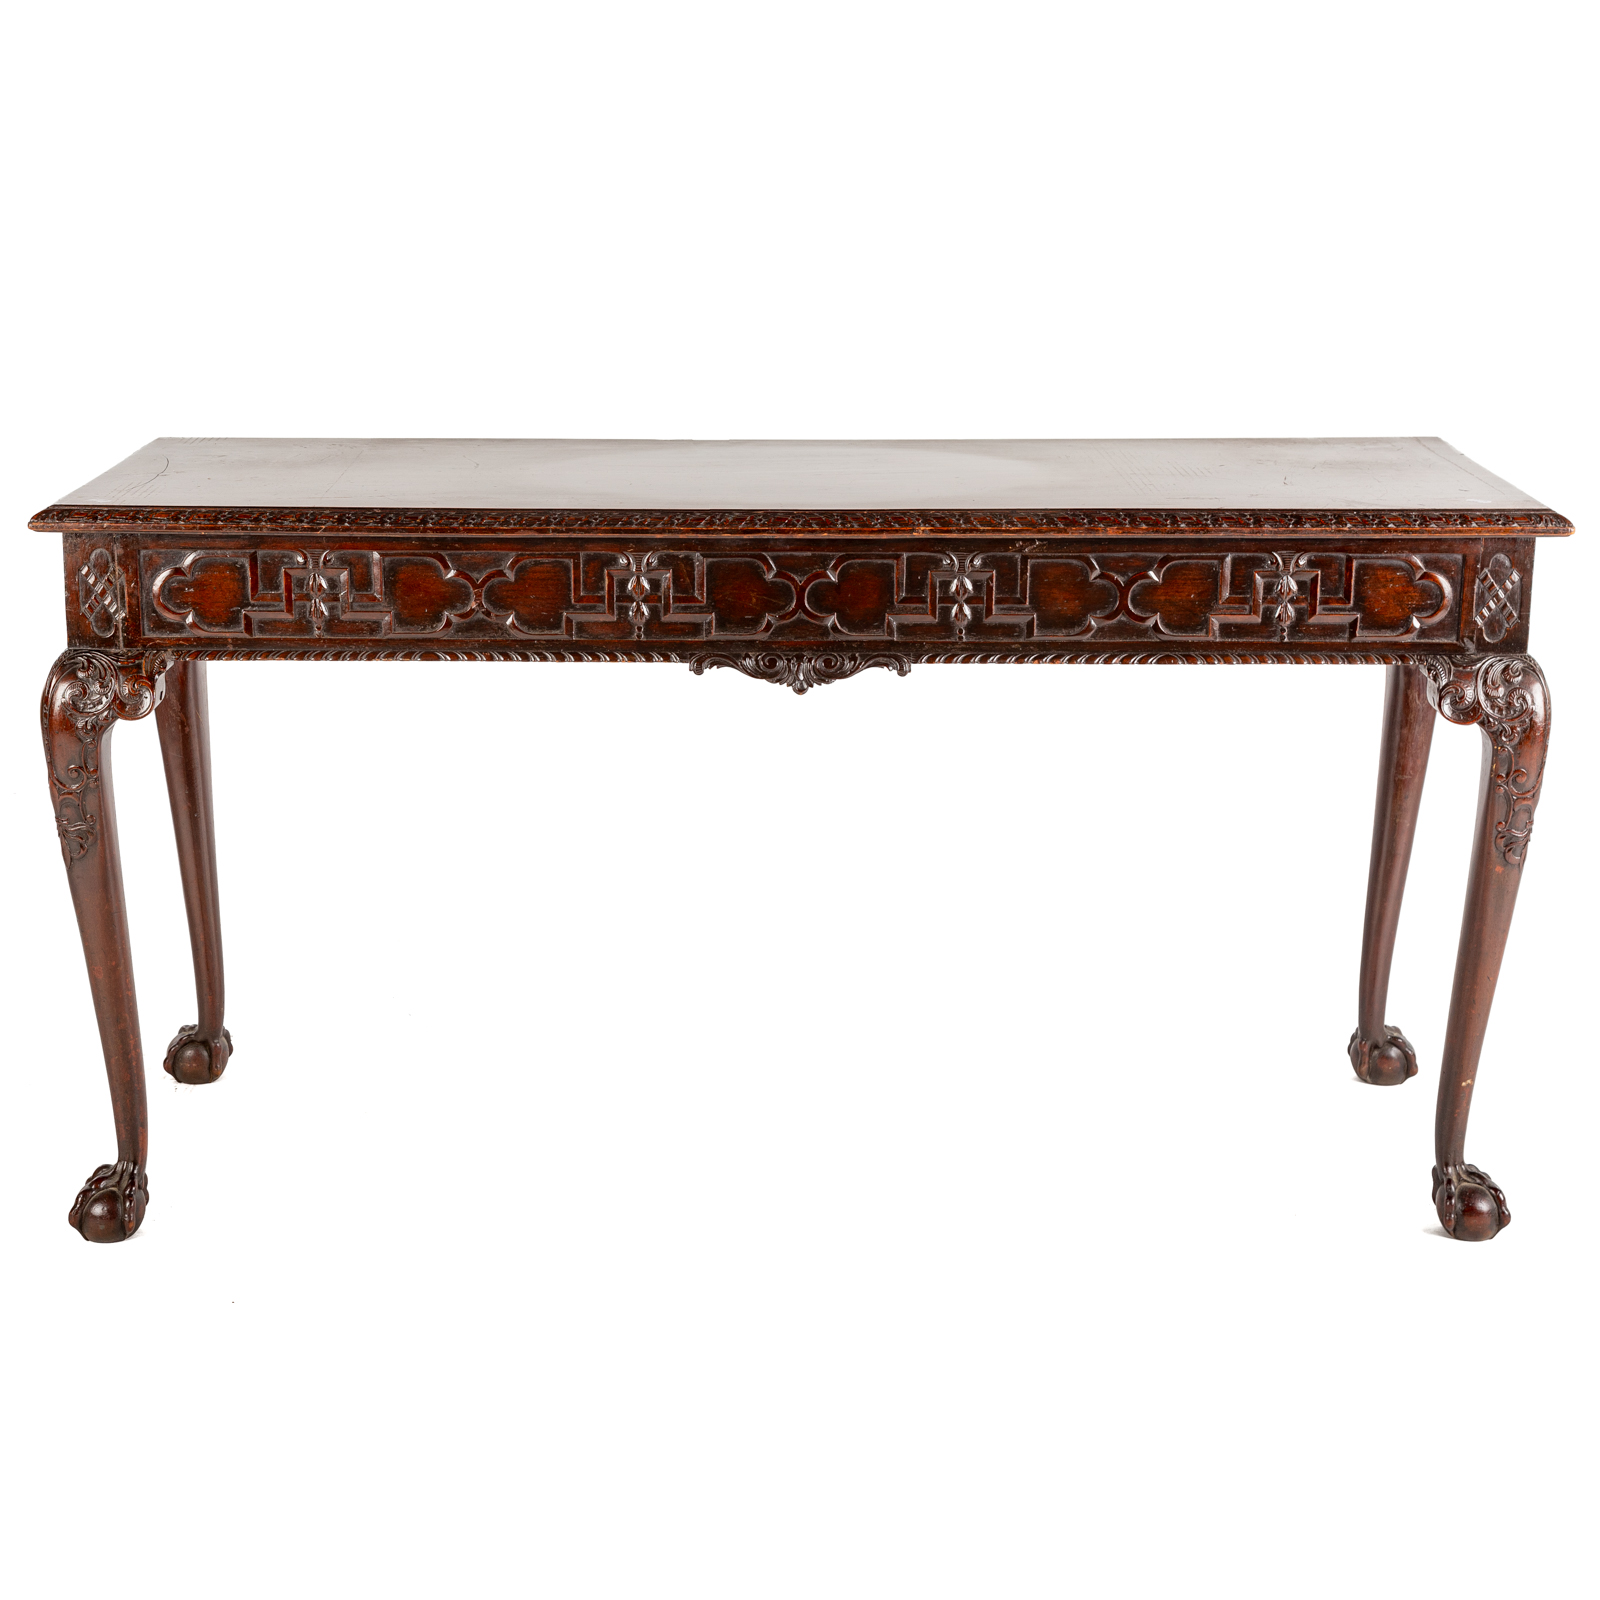 CHINESE CHIPPENDALE STYLE MAHOGANY 3cb99f